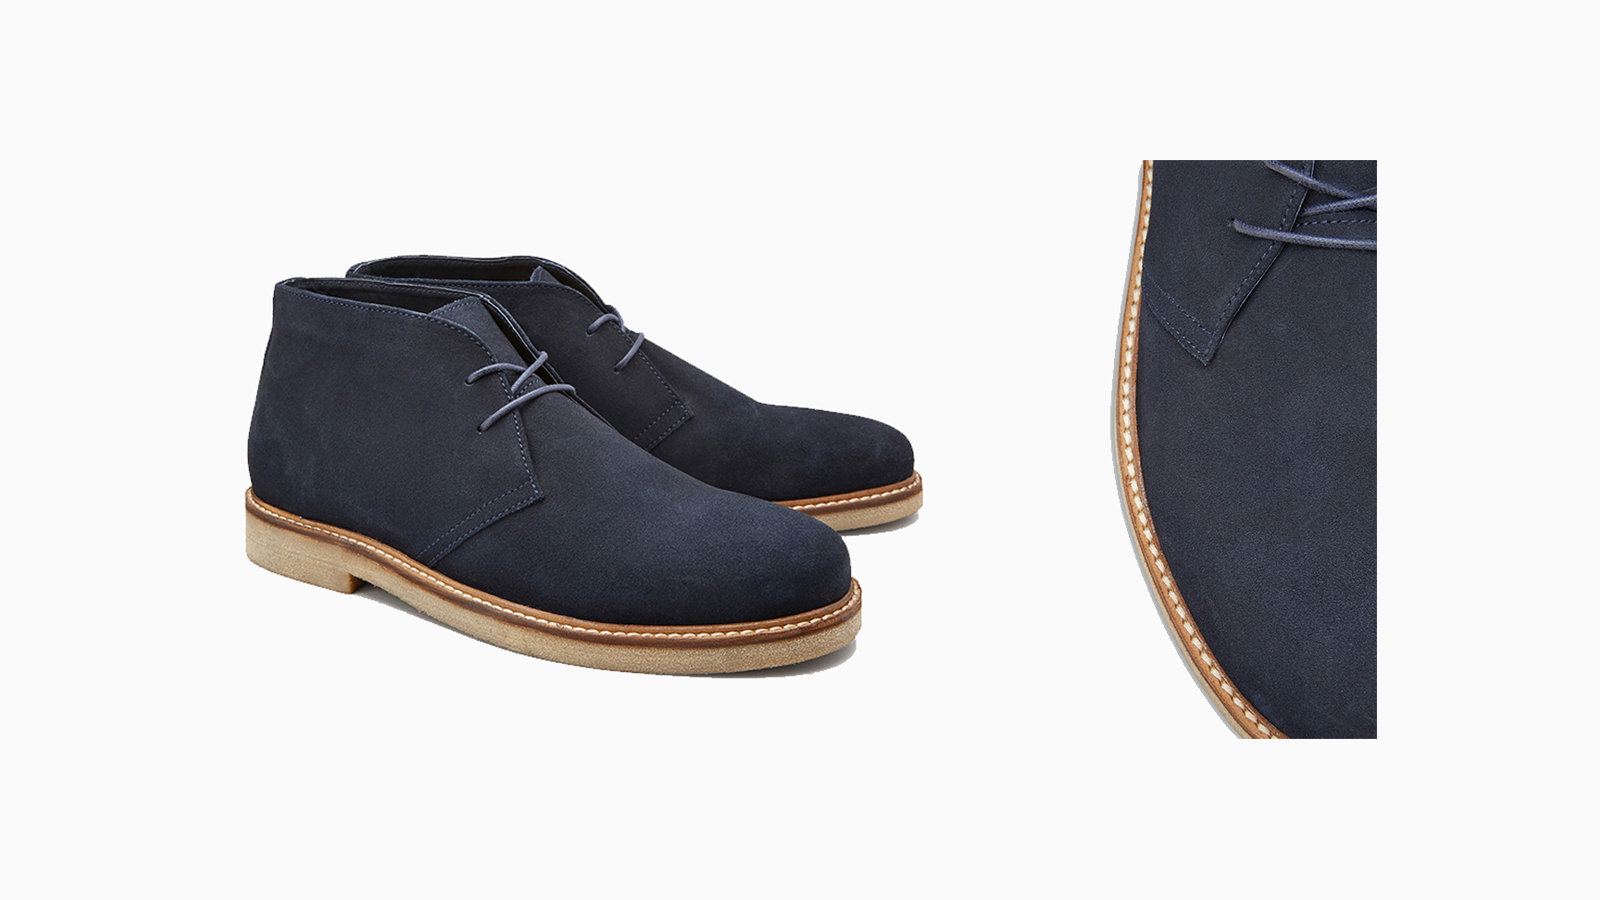 The winter boots you need now - suede desert boots